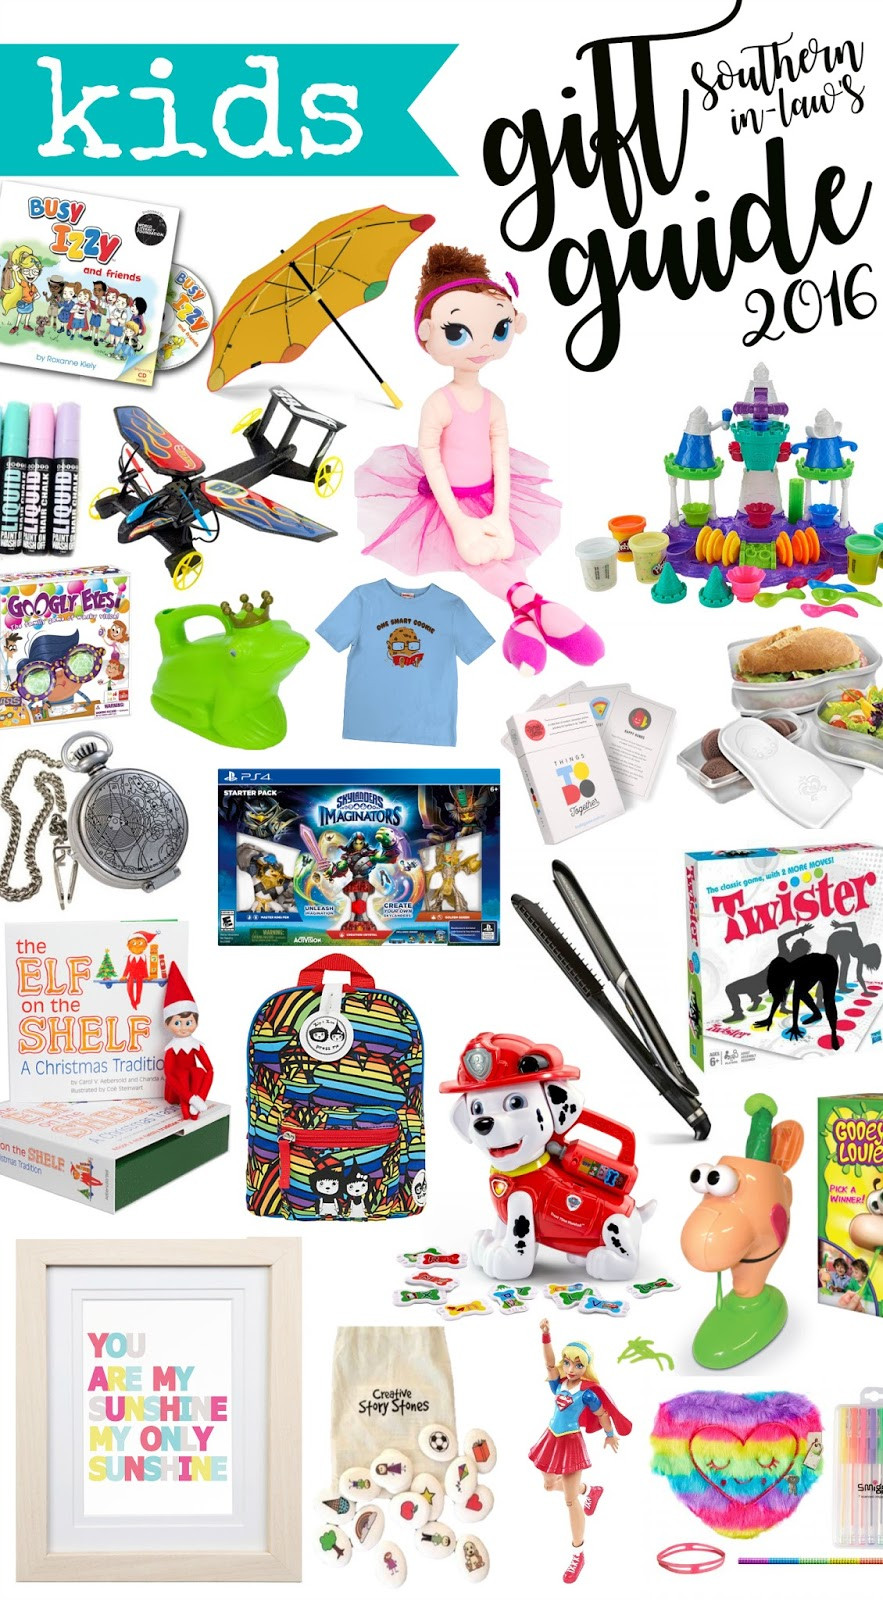 Hottest Gifts For Kids
 Southern In Law 2016 Kids Christmas Gift Guide